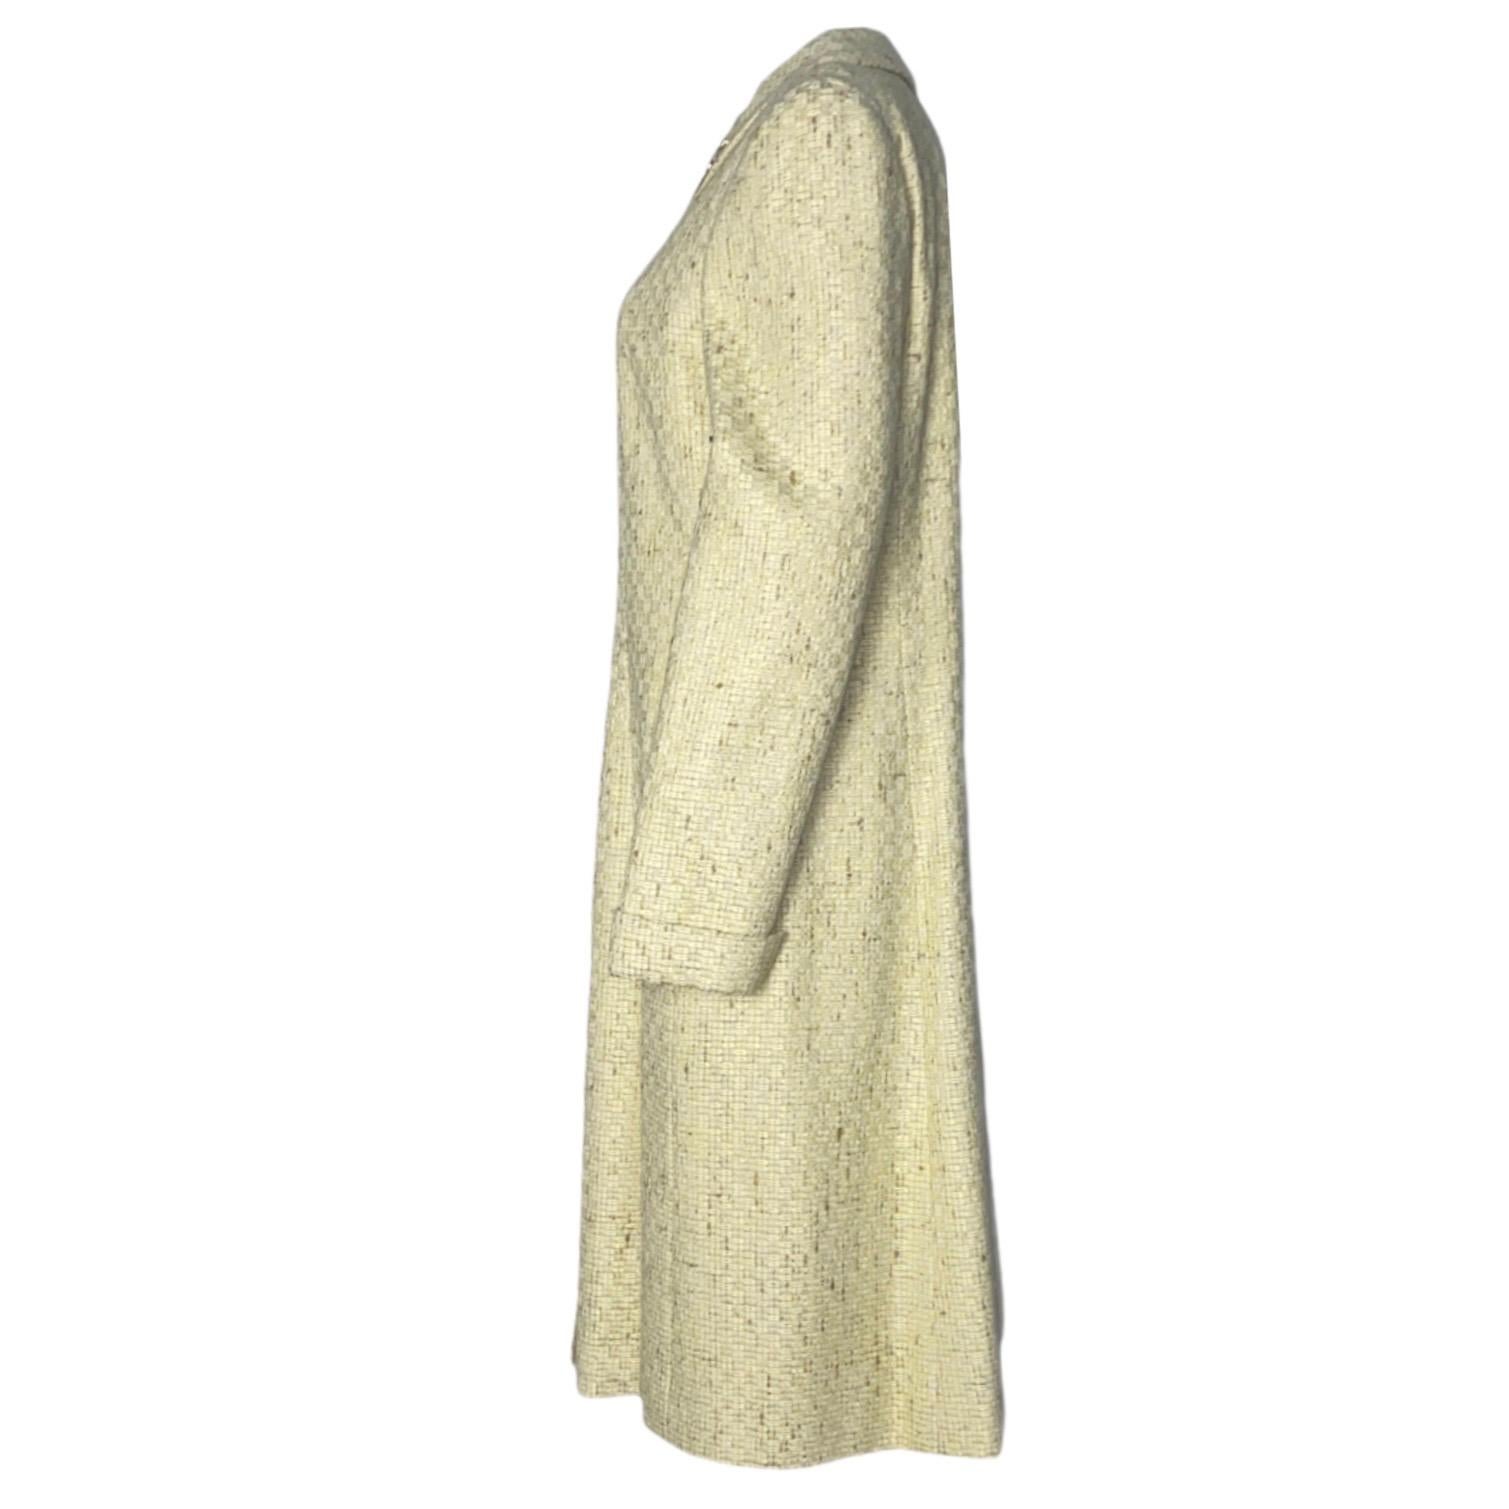 AMAZING & RARE

CHANEL SIGNATURE TWEED COAT

A TIMELESS CLASSIC & TRUE CHANEL PIECE THAT SHOULD BE IN EVERY WOMAN'S WARDROBE

DETAILS:
Beautiful CHANEL tweed coat
A true CHANEL signature item 
Beautriful classic tweed fabric - exclusively designed